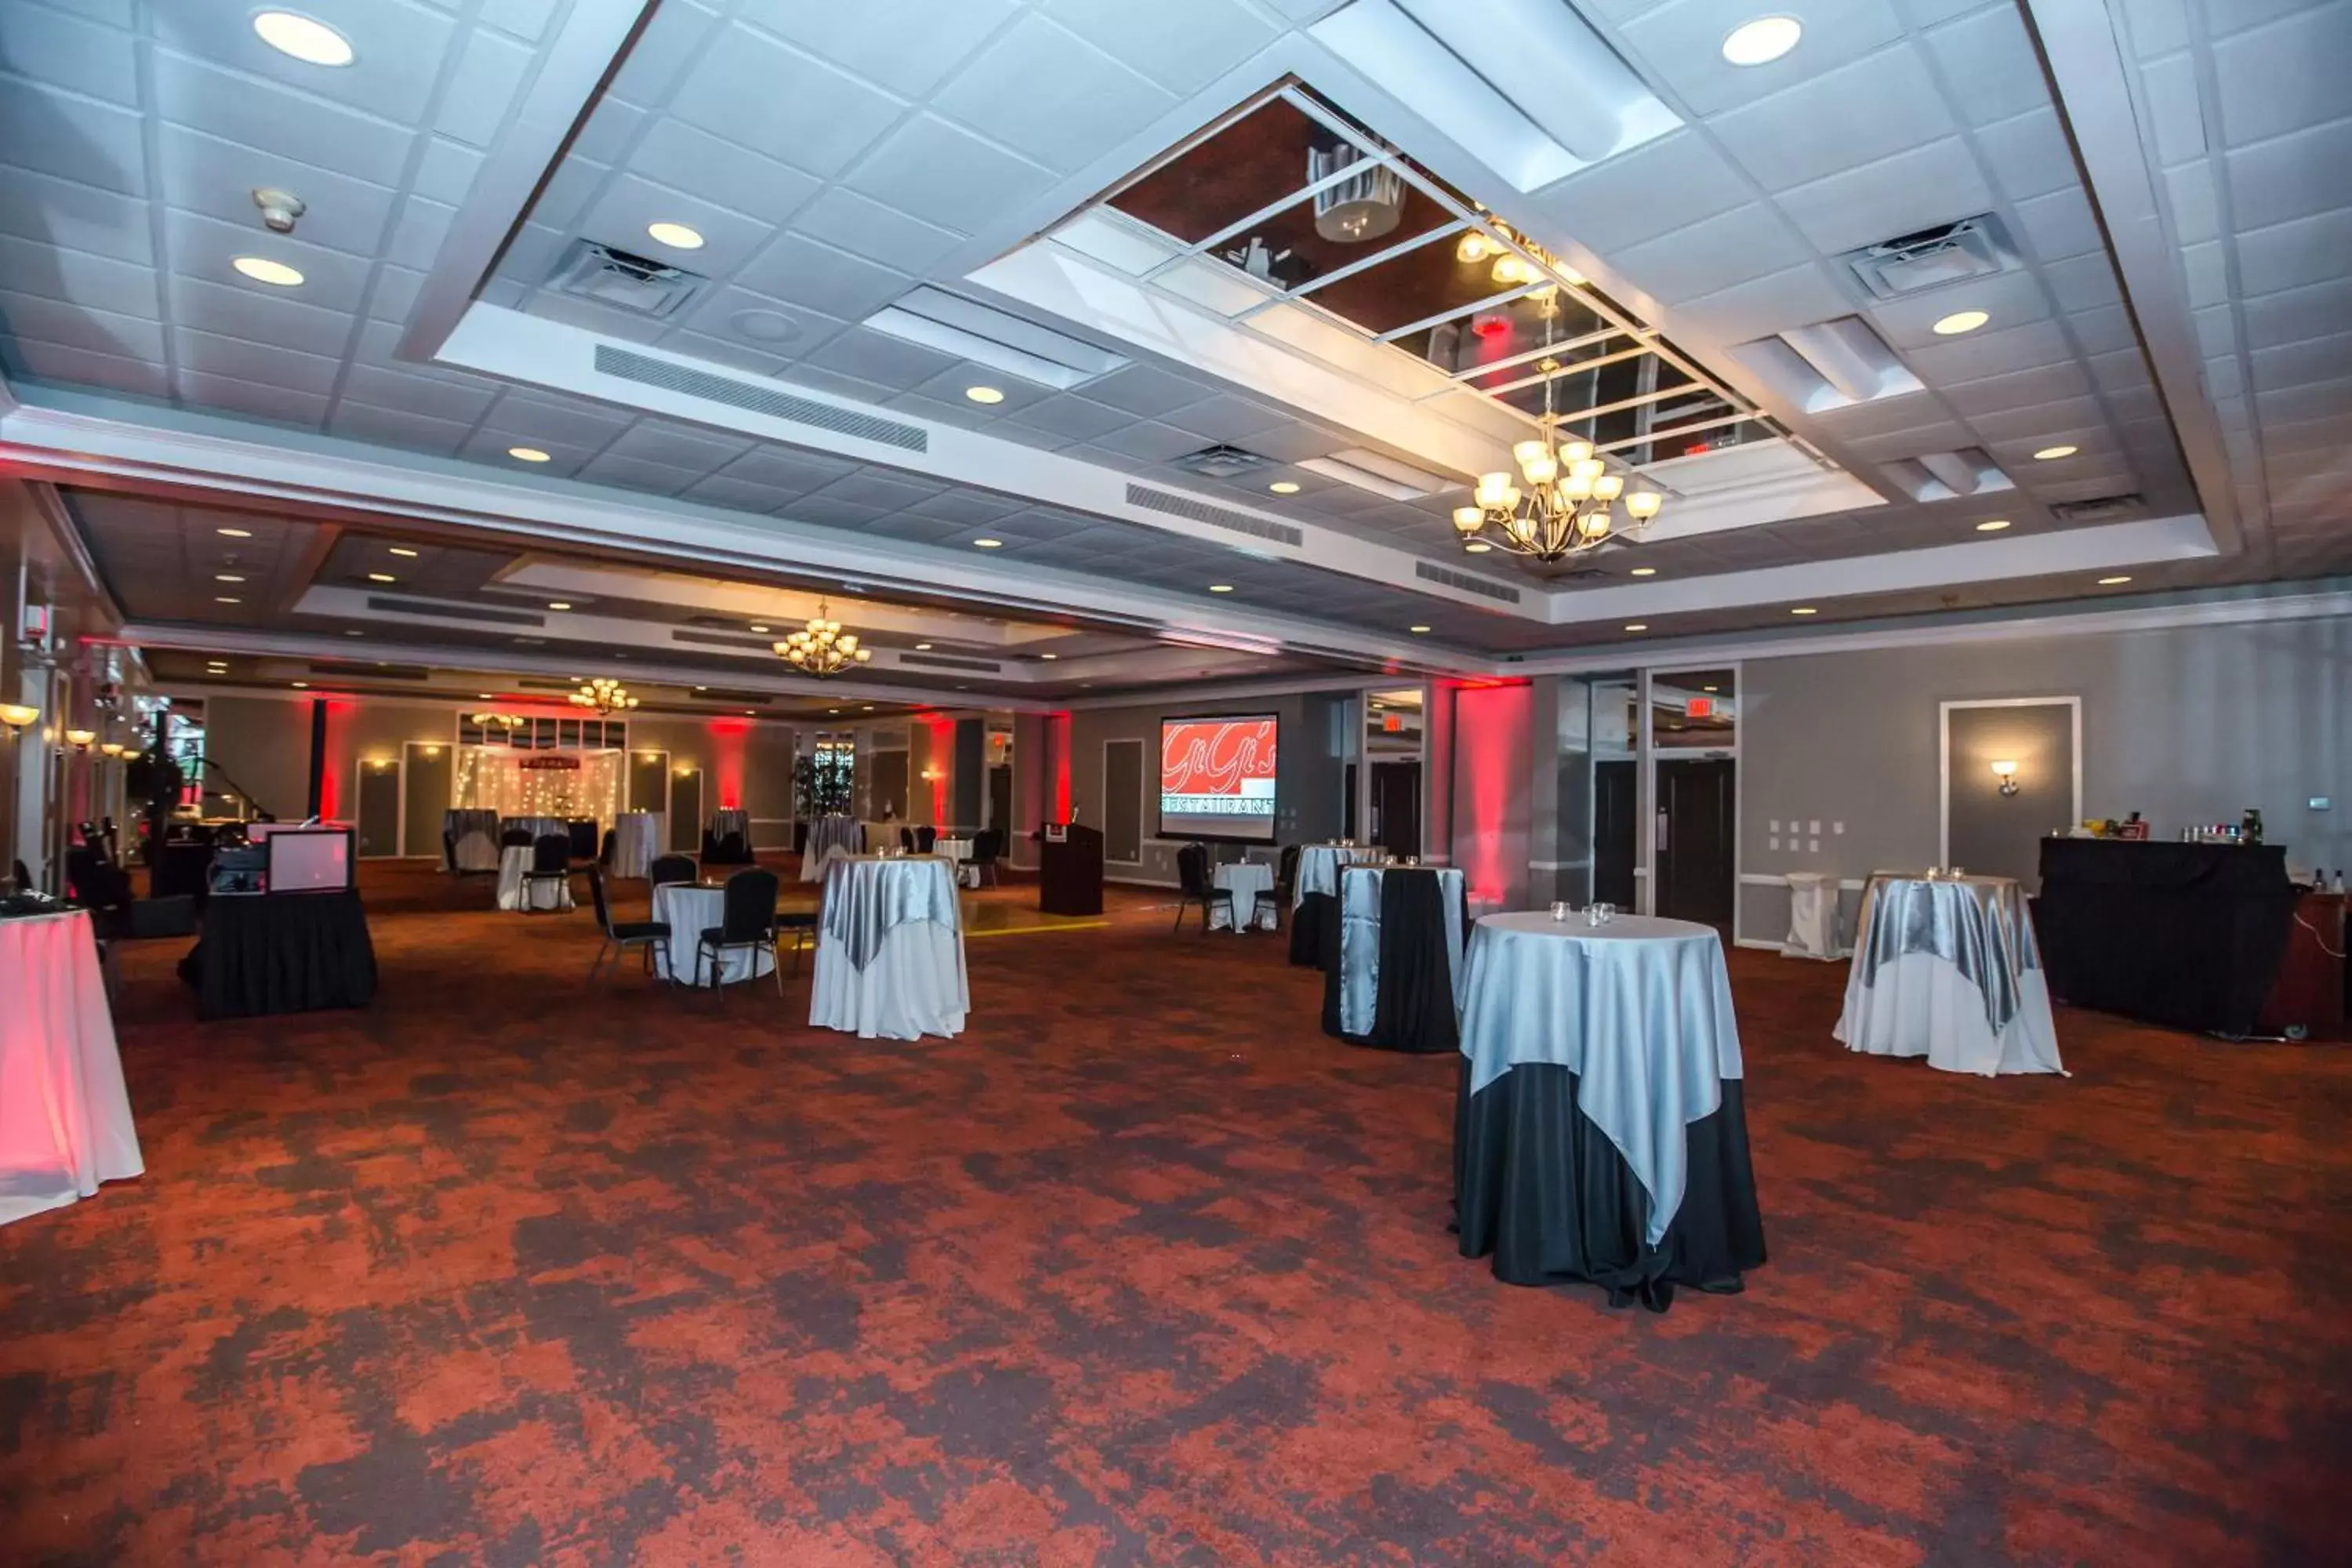 Banquet/Function facilities, Banquet Facilities in Ramada by Wyndham Jacksonville Hotel & Conference Center